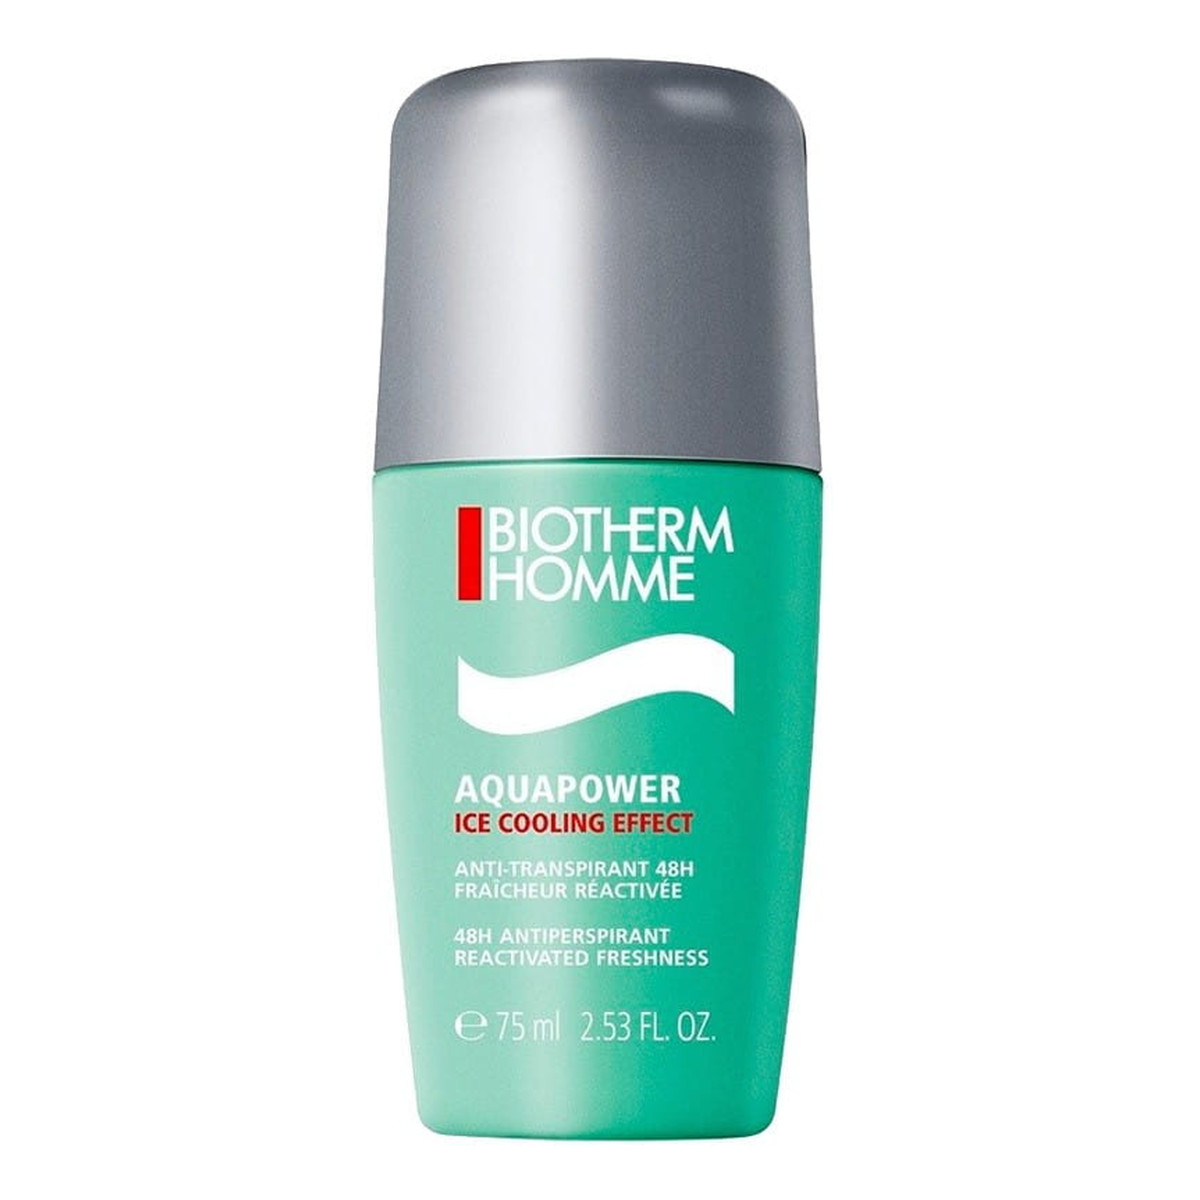 Biotherm Aquapower Ice Cooling Effect 48H antyperspirant w kulce 75ml